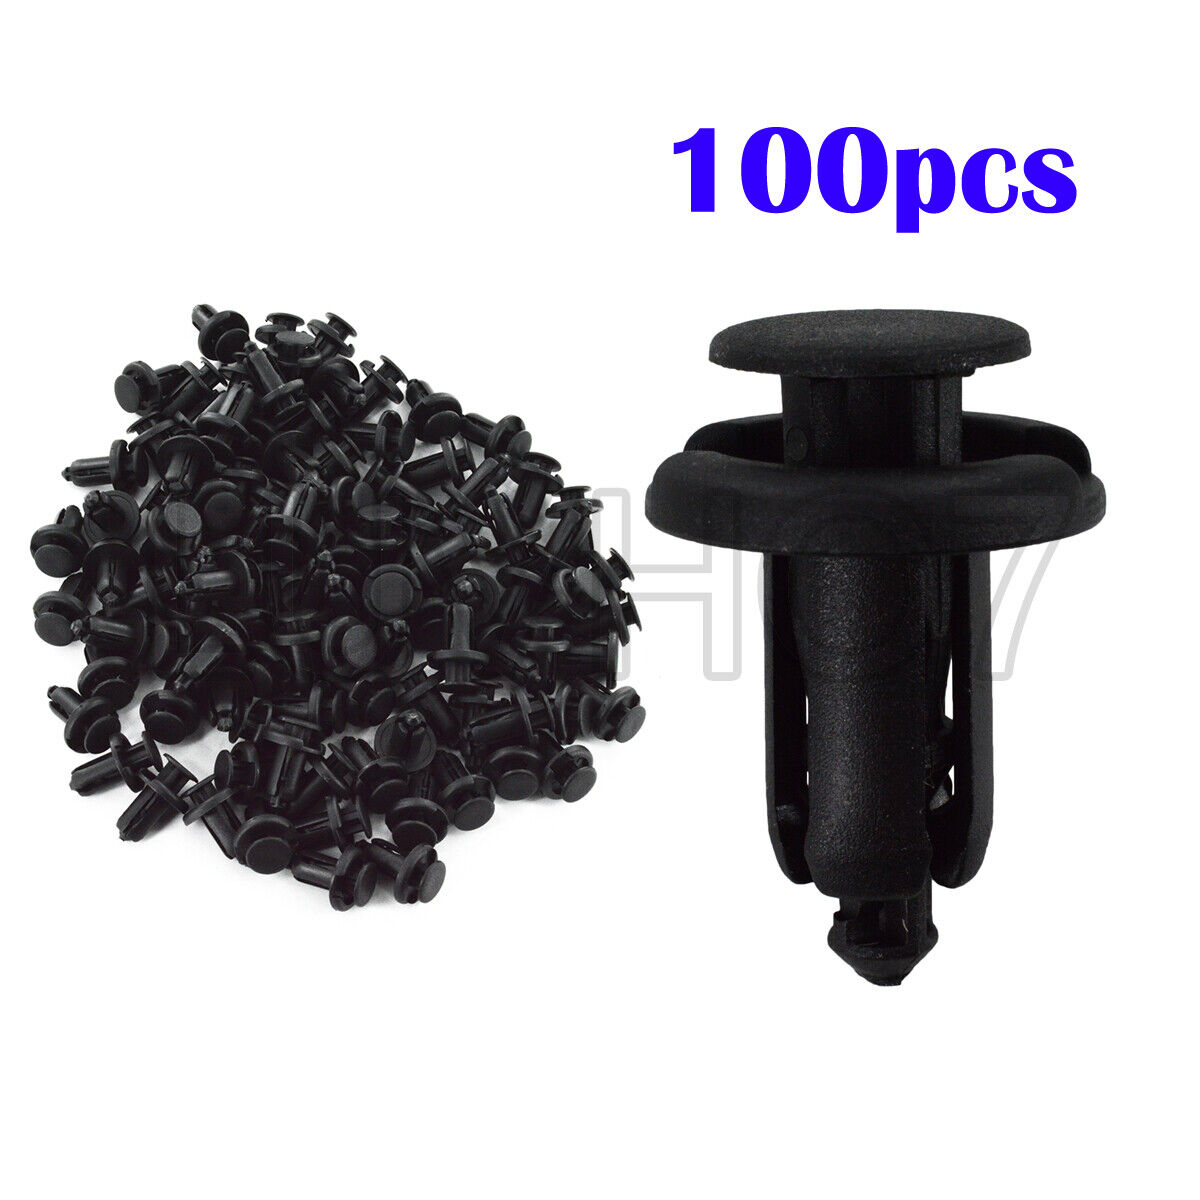 100pcs Bumper Engine Cover Fender Clips Push Type Retainers Fasteners For Subaru